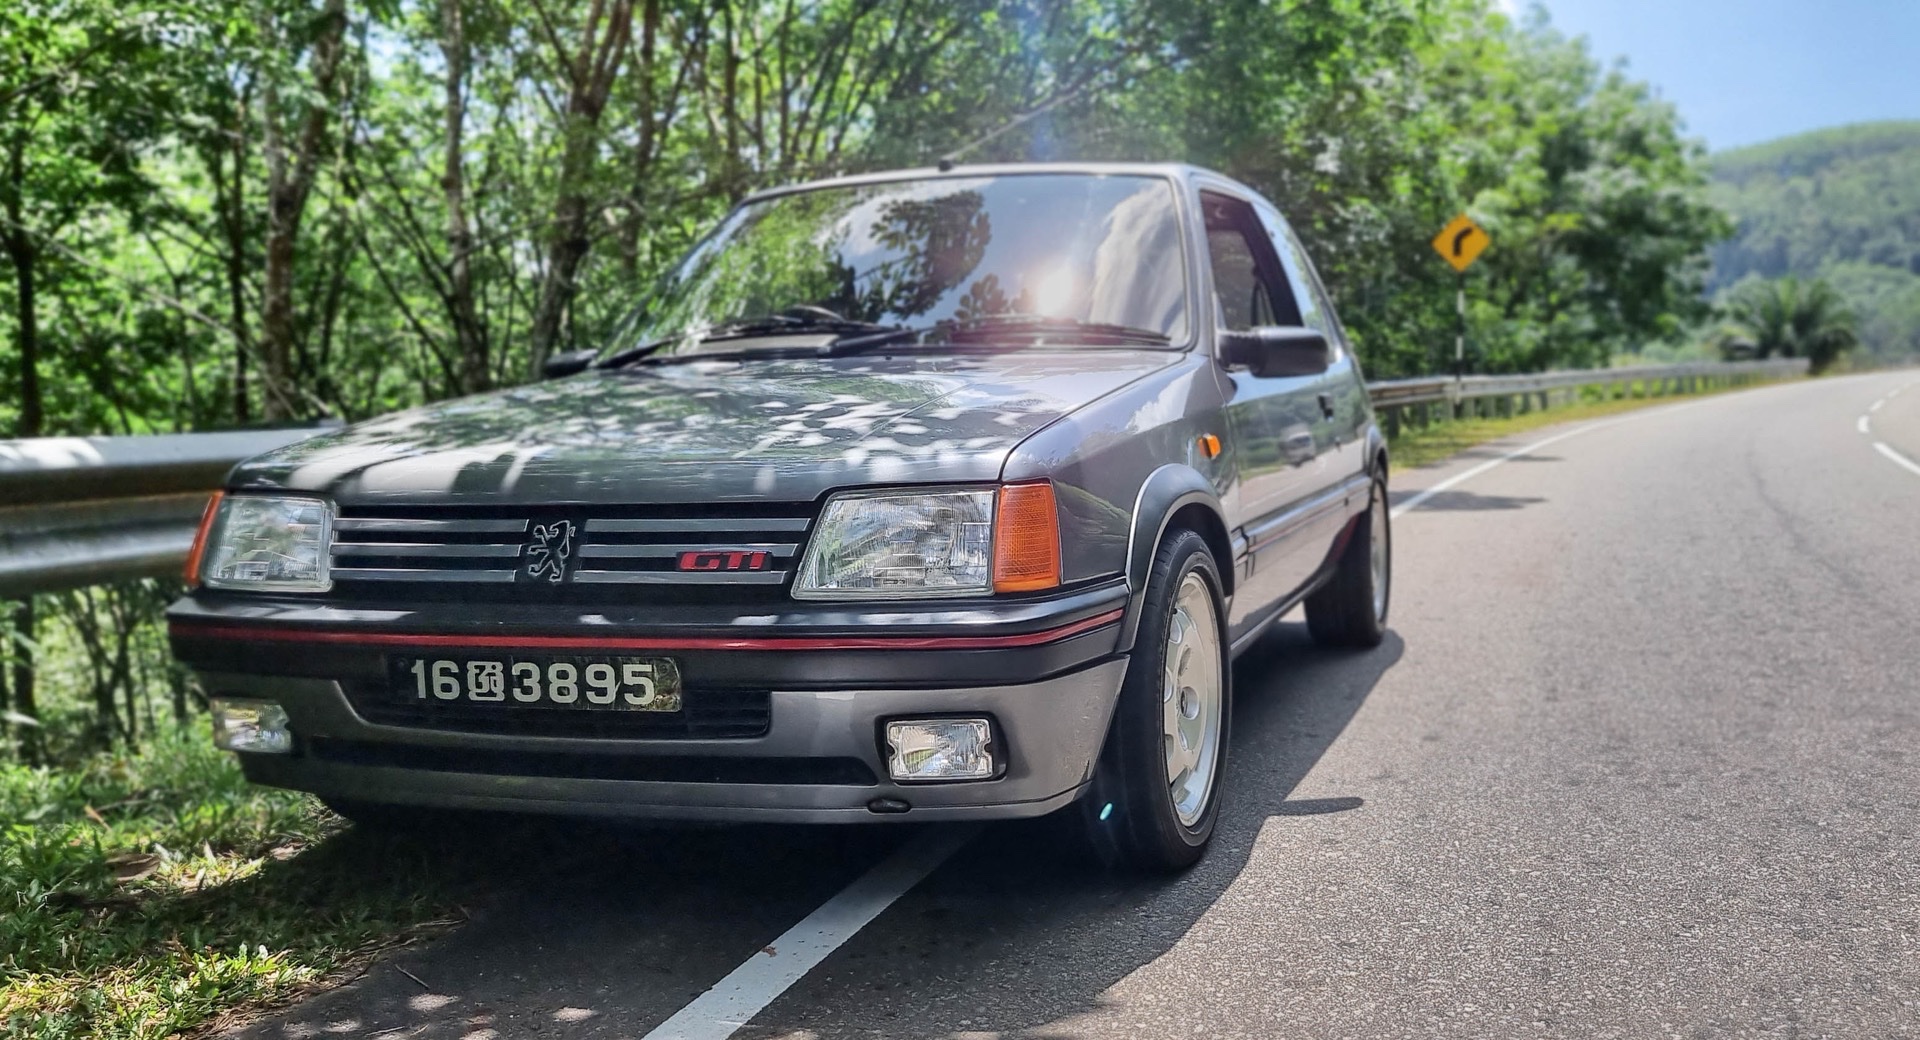 We would drive this low-mileage Peugeot 205 GTI all across France